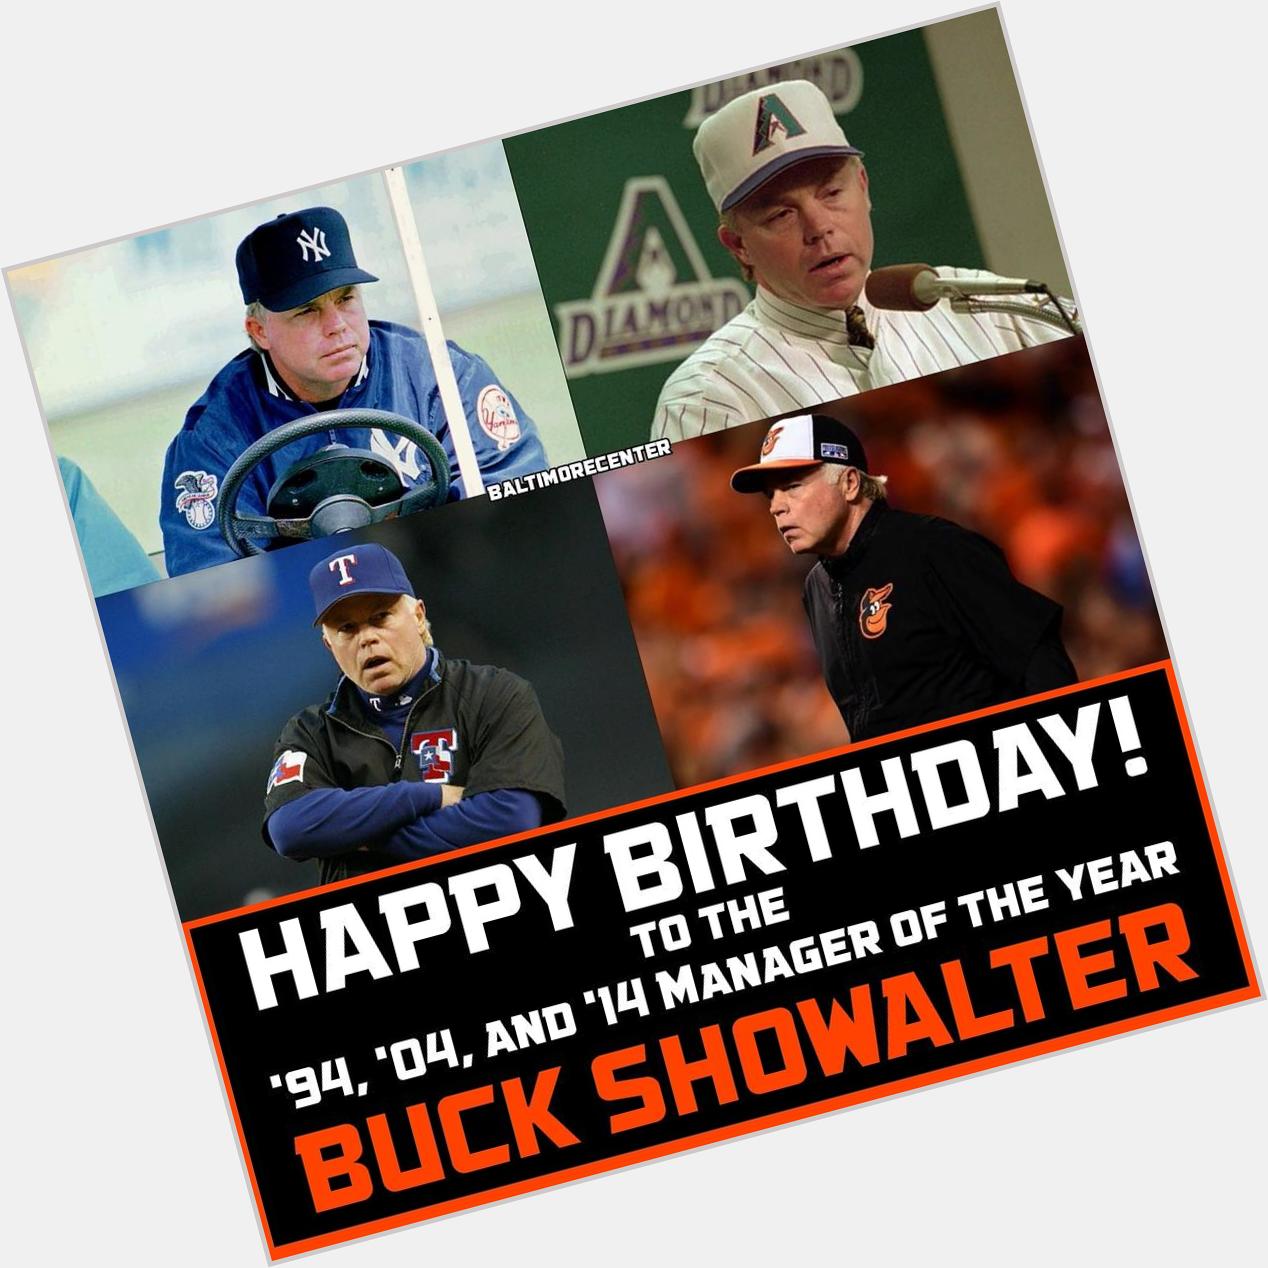 HAPPY BIRTHDAY to the 3x Manager of the Year, Buck Showalter!! 